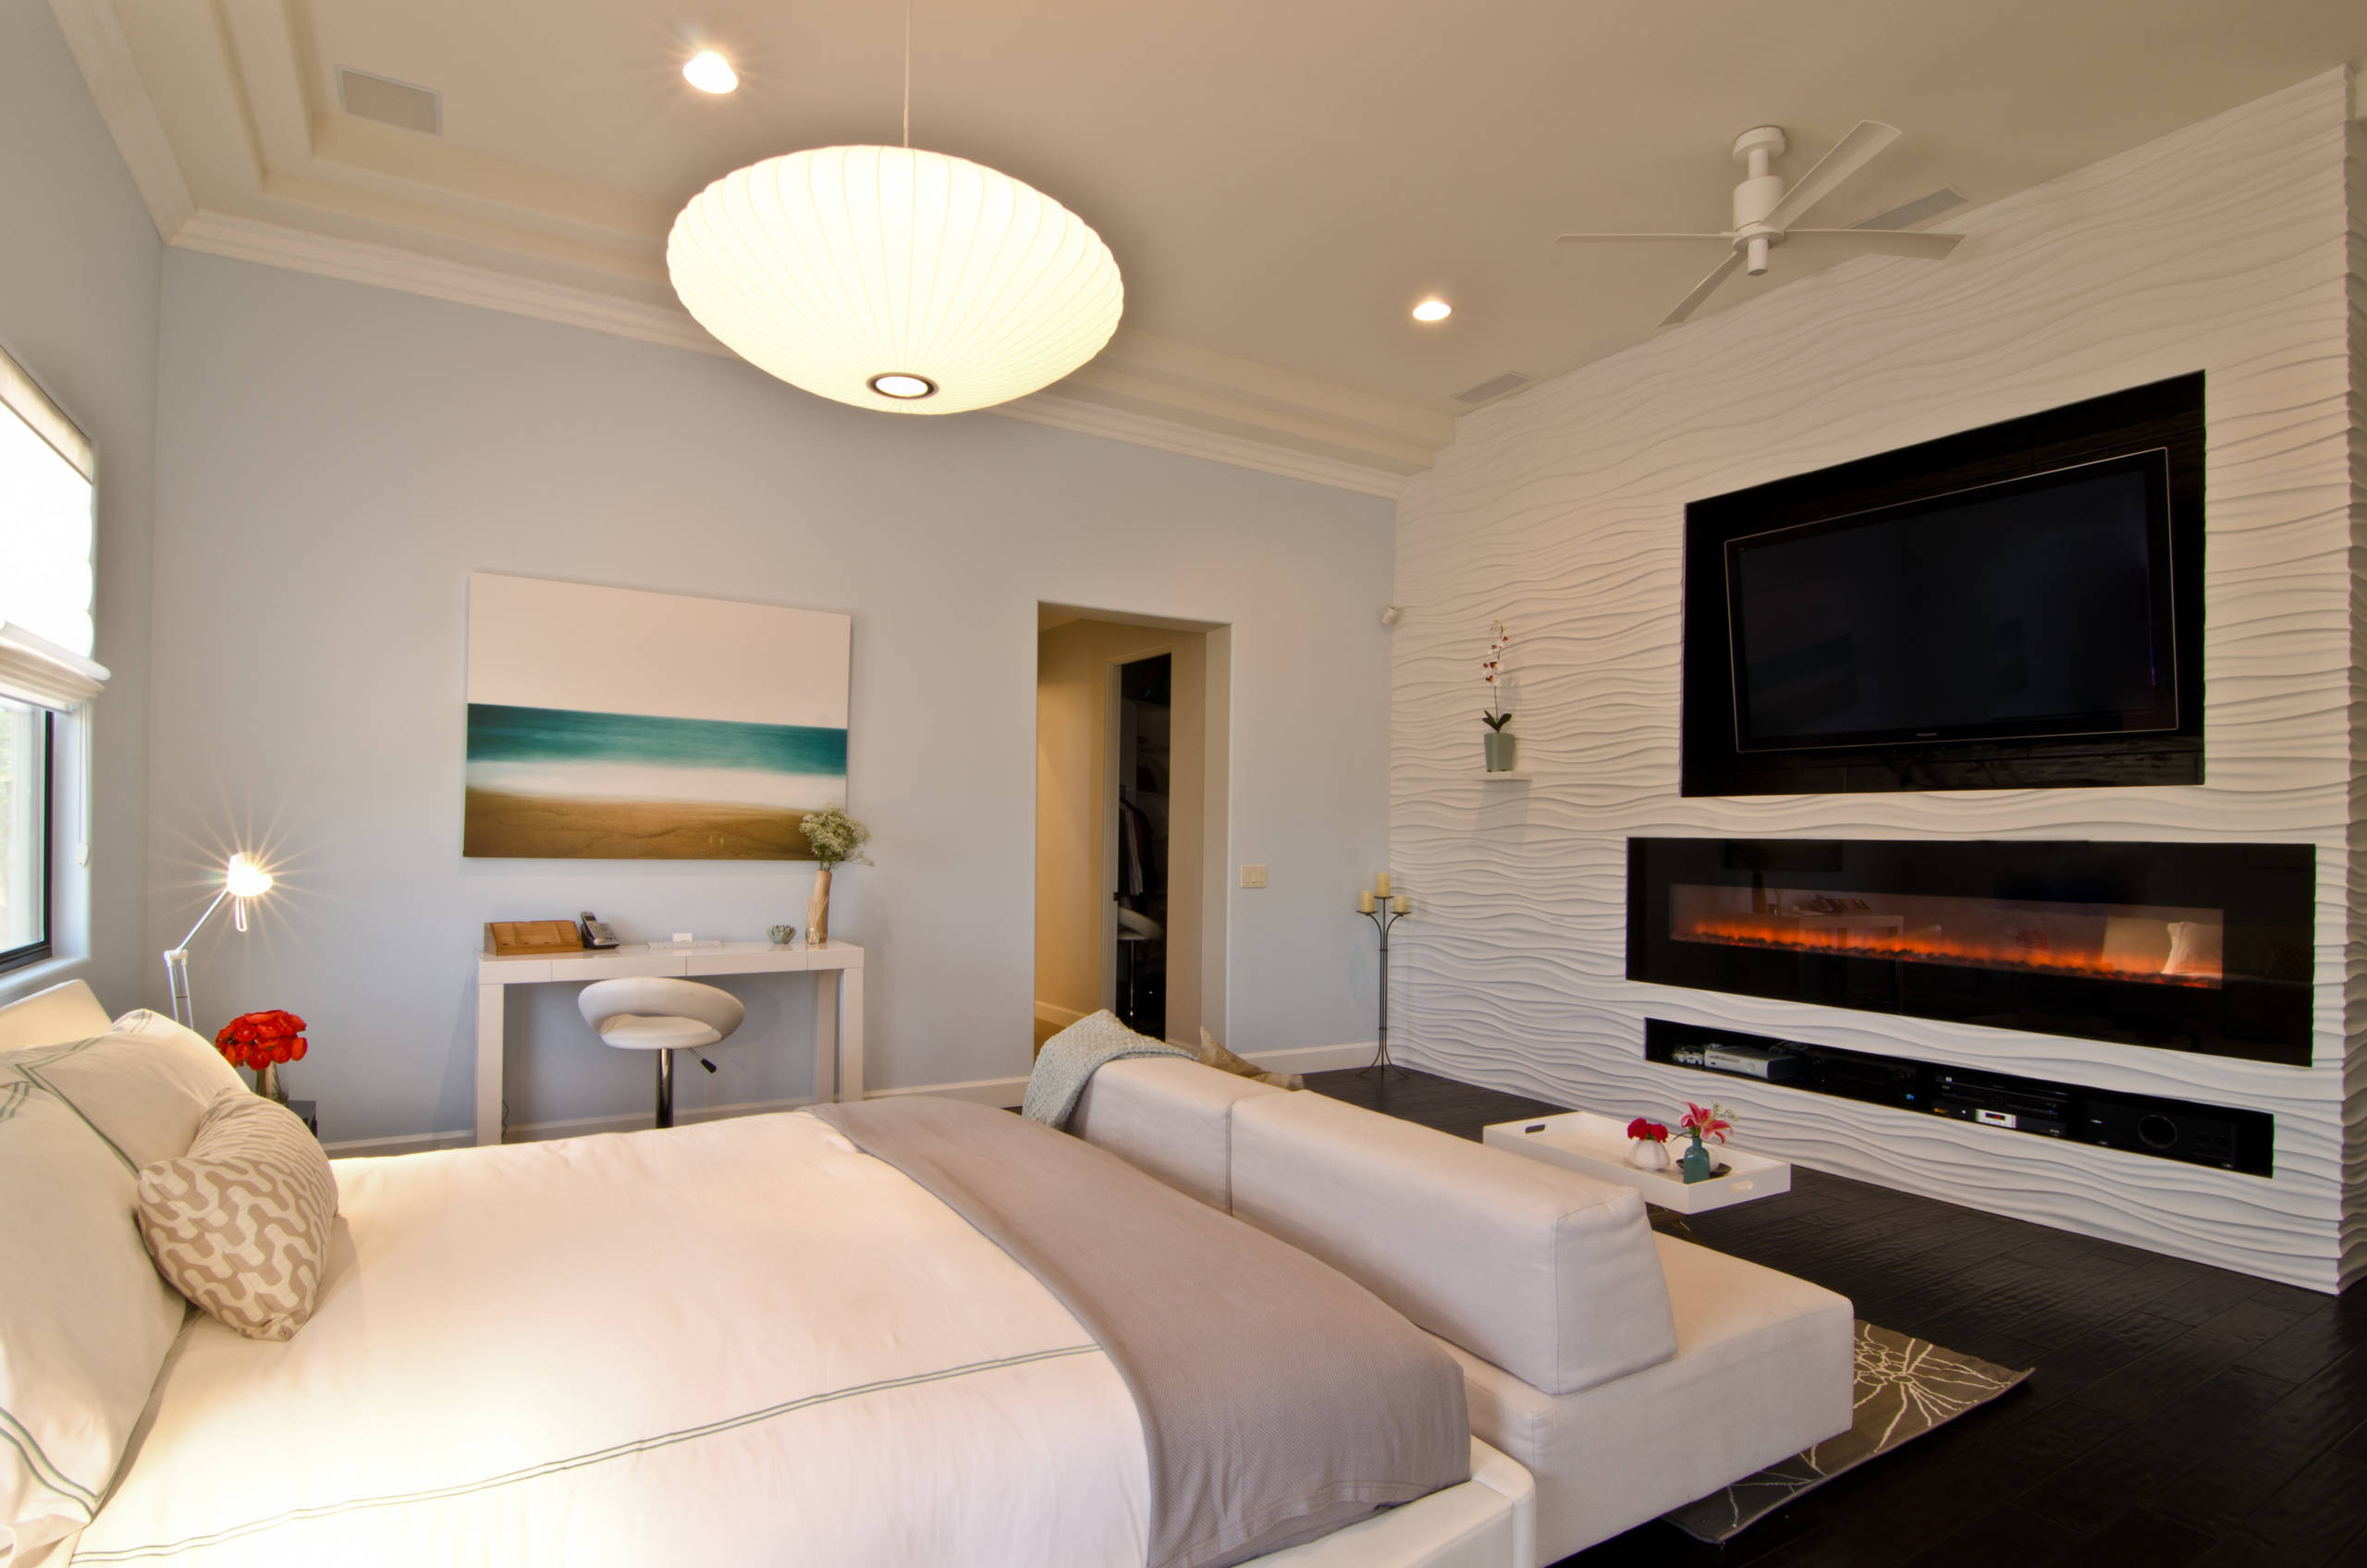 Fireplace Tv Houzz, Bedroom With Fireplace And Tv